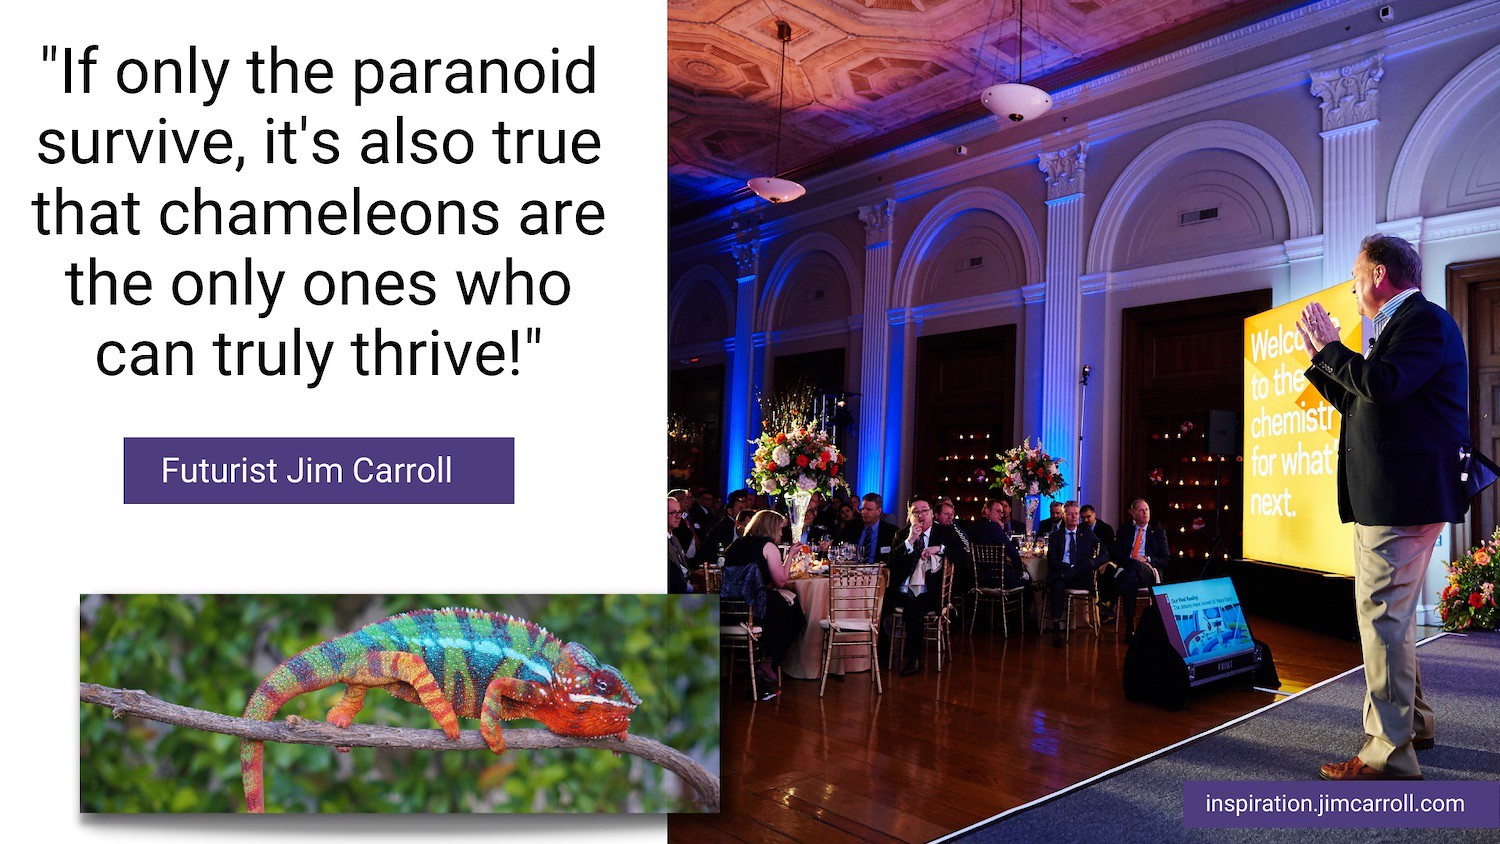 "If only the paranoid survive, it's also true that it's the chameleons who will thrive!" - Futurist Jim Carroll